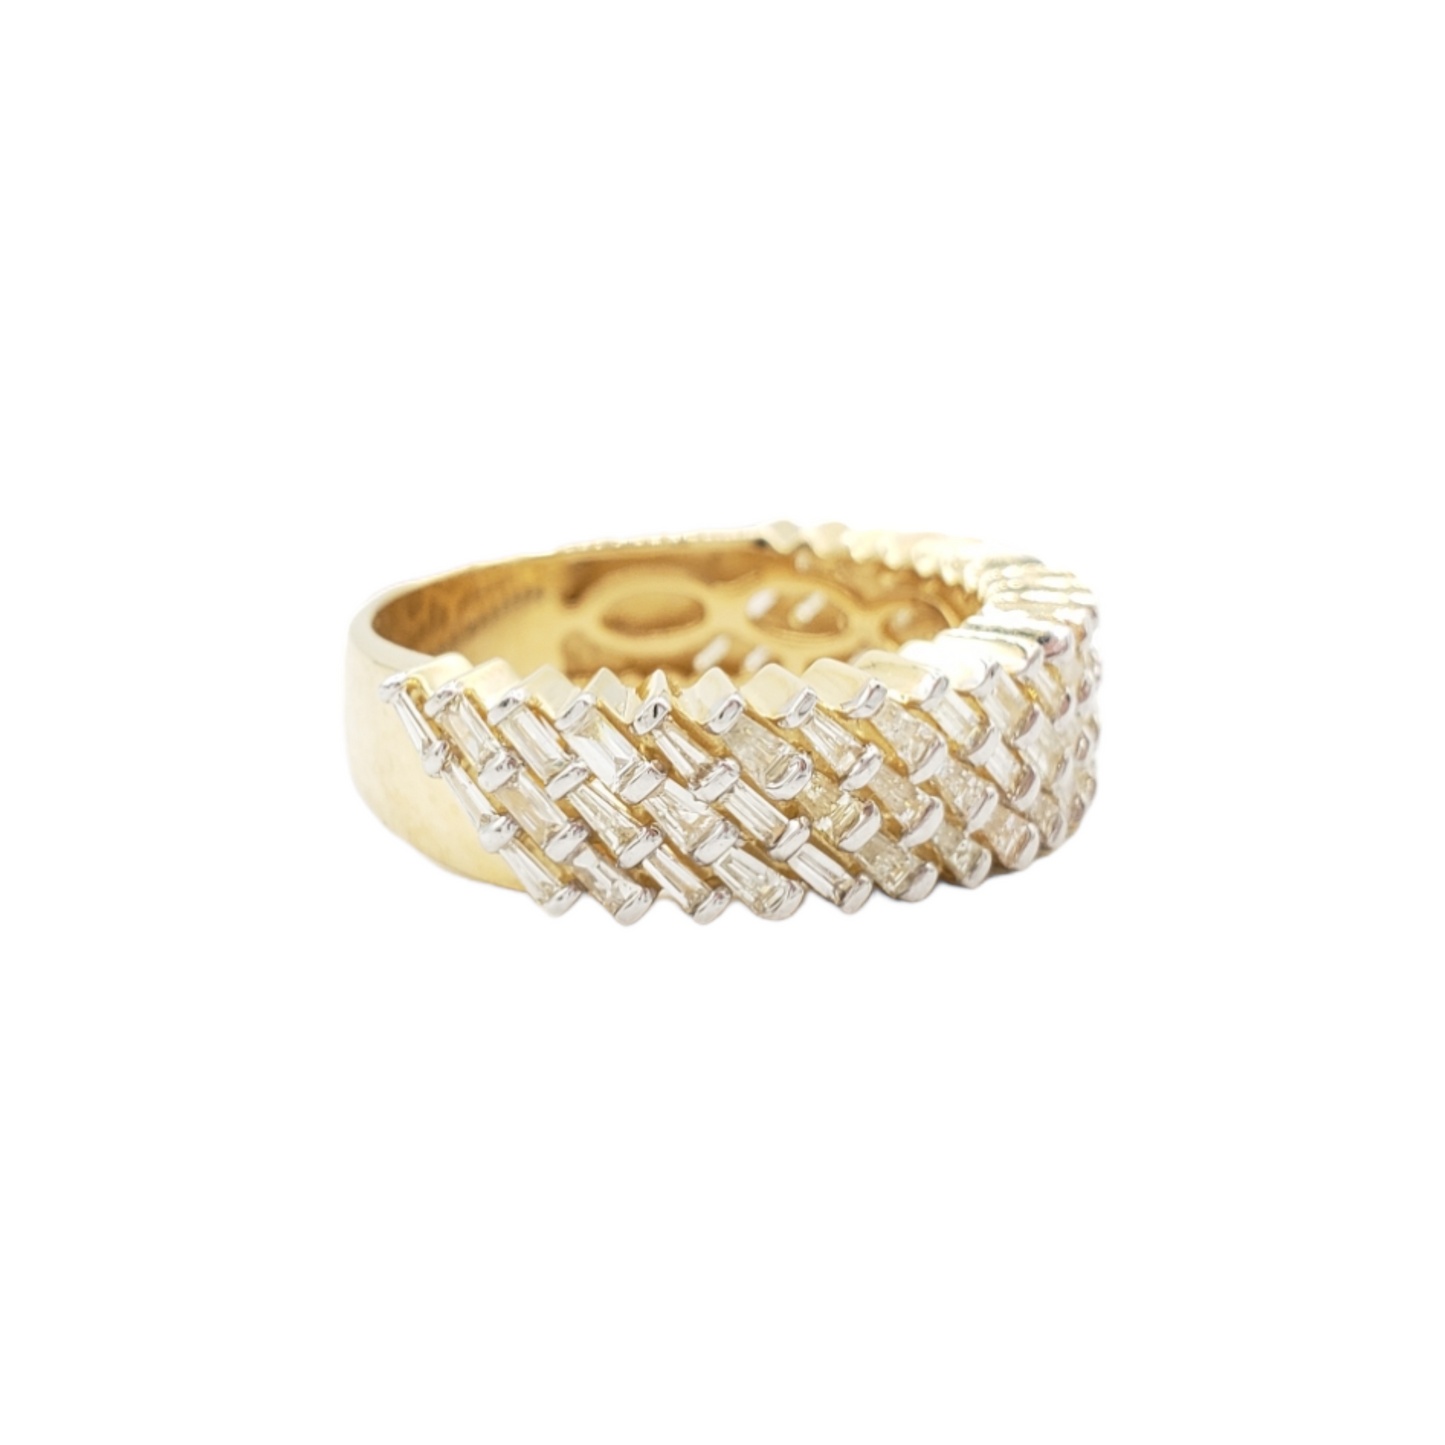 14k Baguette Diamond Ring With 1.87 Carats Of Diamonds #20653